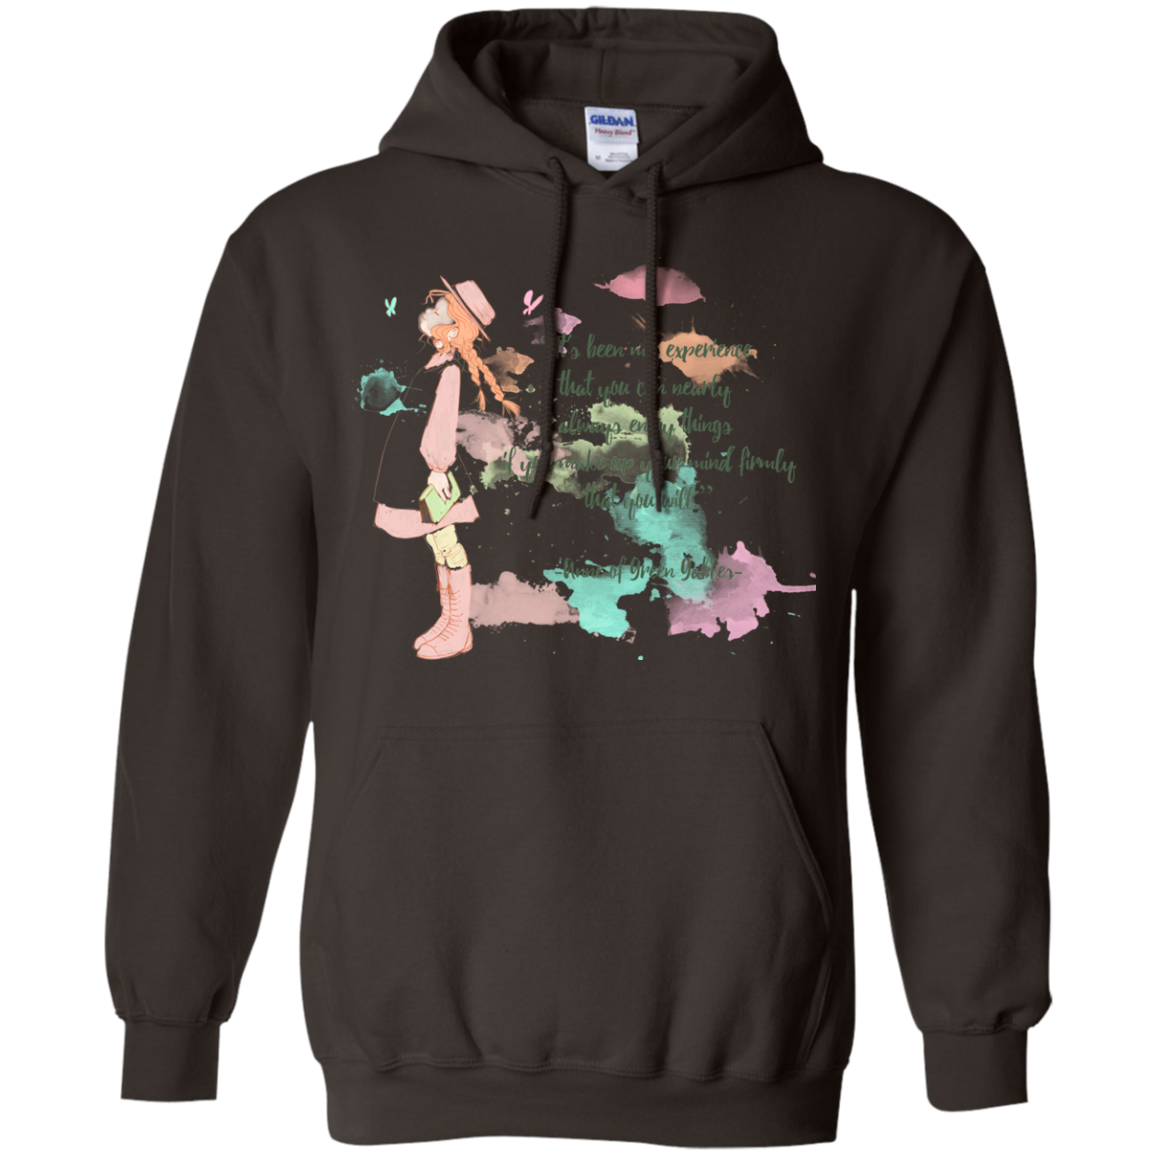 Anne of Green Gables Pullover Hoodie